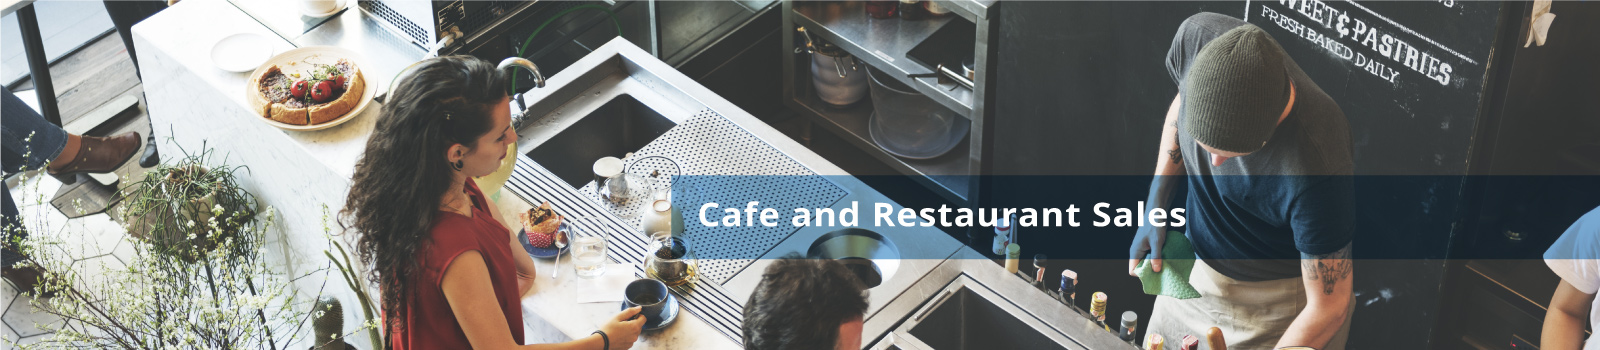 Cafe and Restaurant Sales